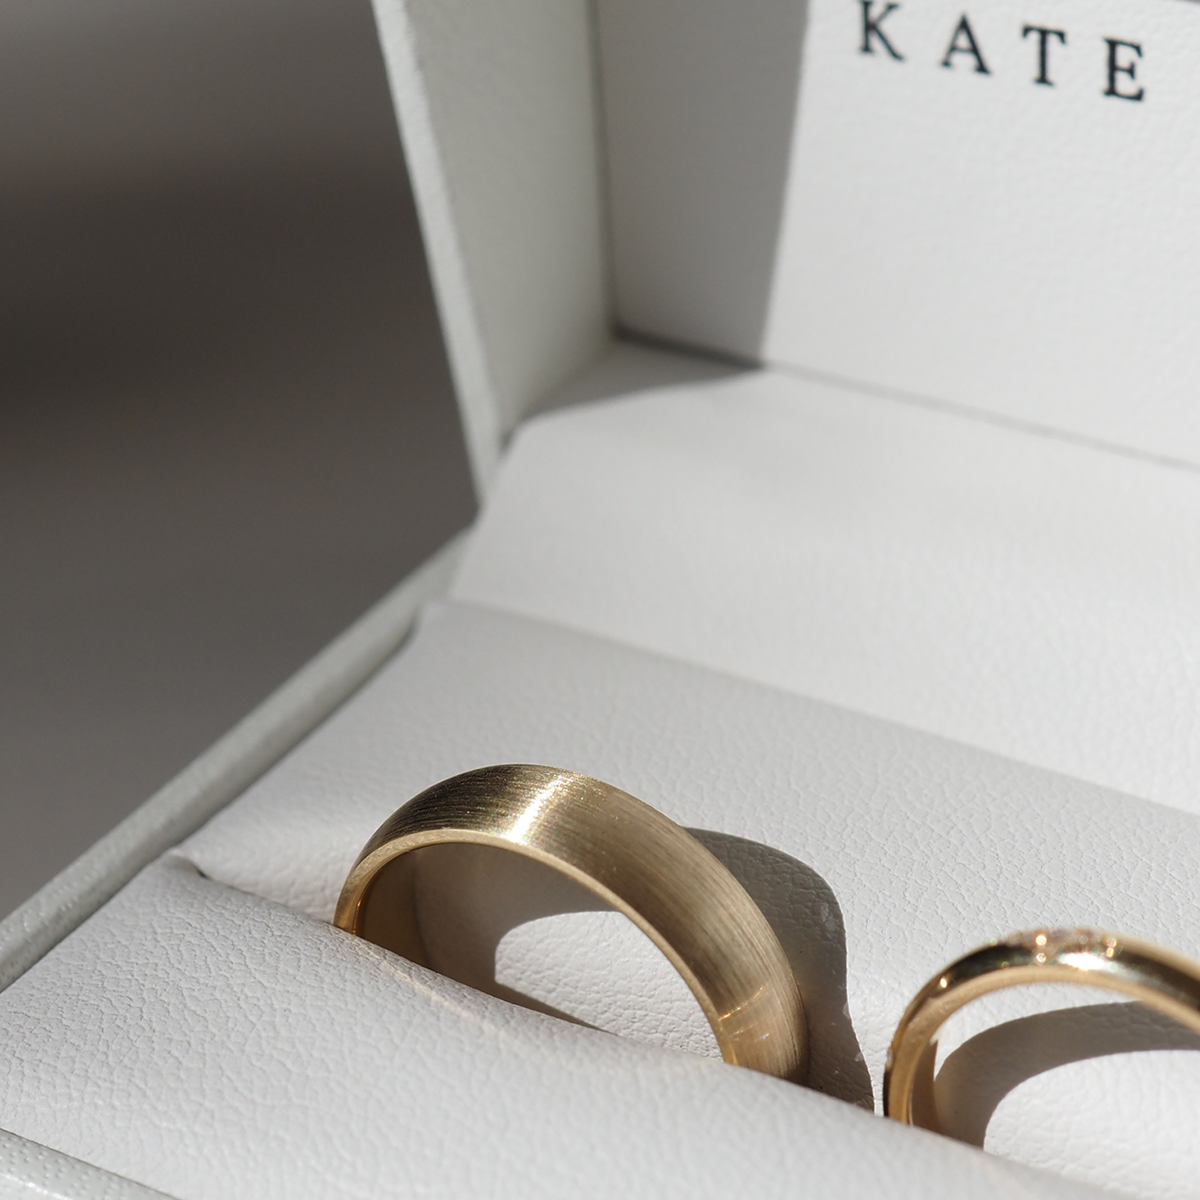 Our classic half-round wide wedding band is 6mm wide and 1.9mm thick. It has a polished finish in 18ct yellow gold. 